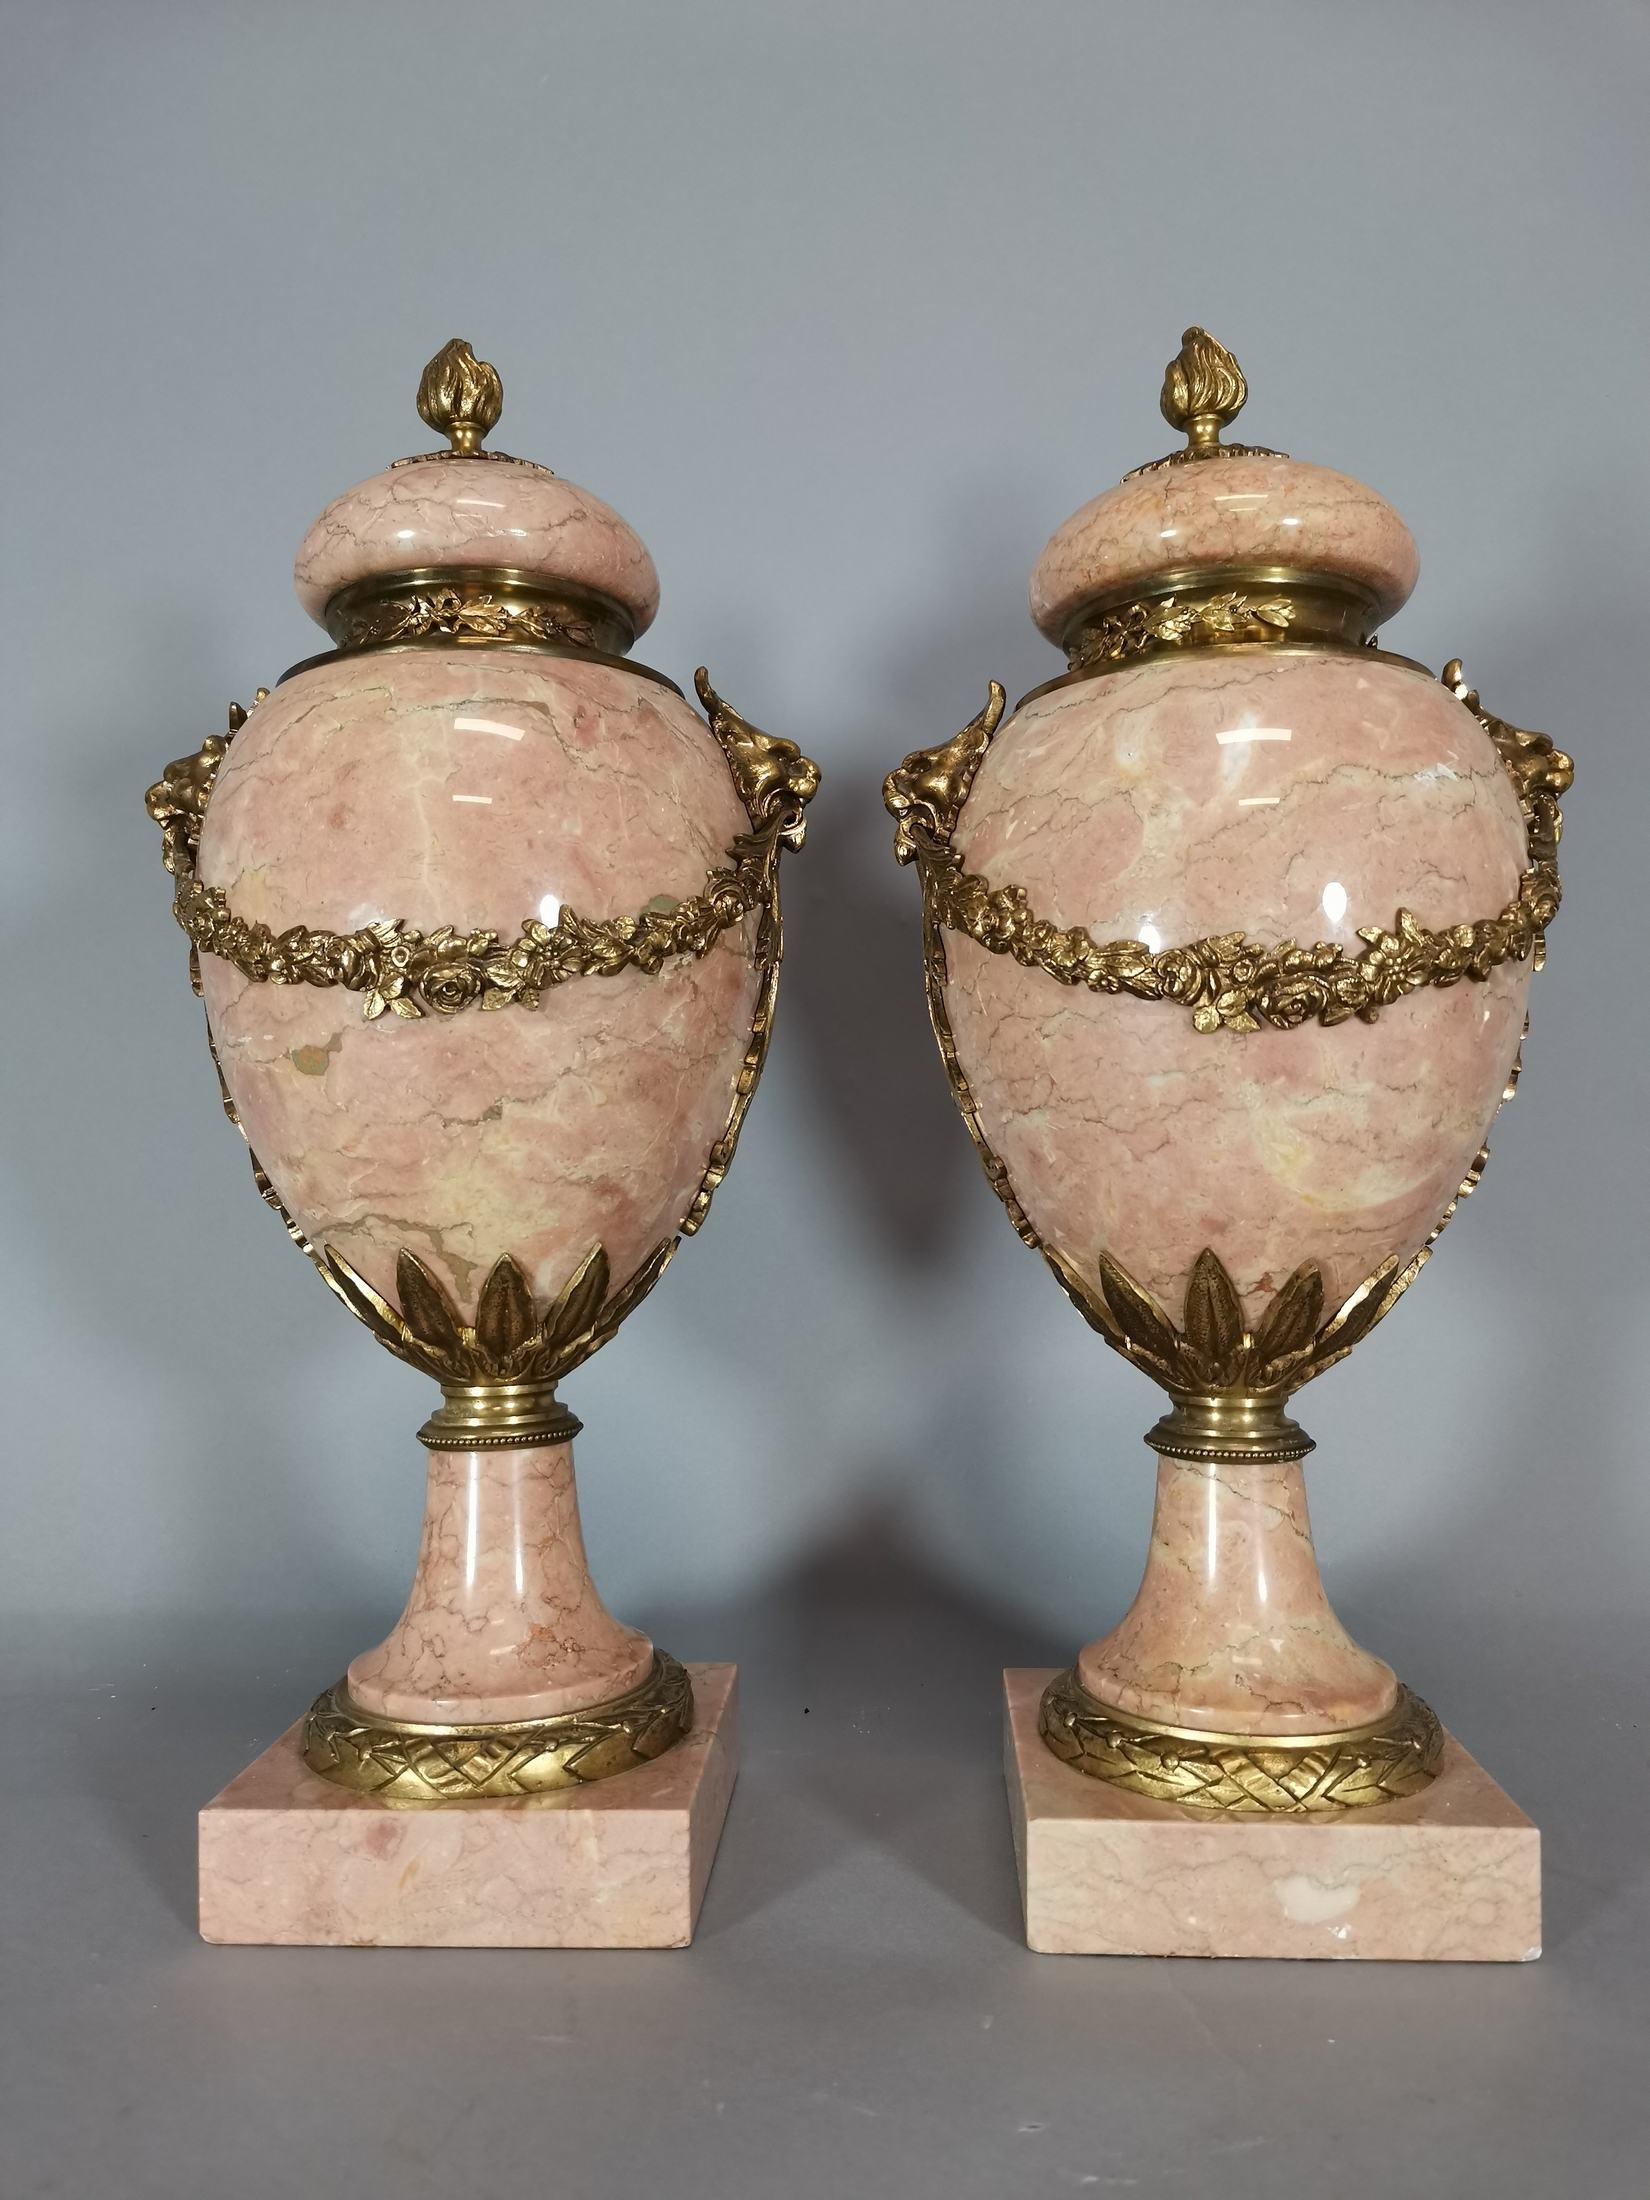 Pair of Marble and Gild Bronze Vase from the Early 1900, 20th Century For Sale 1